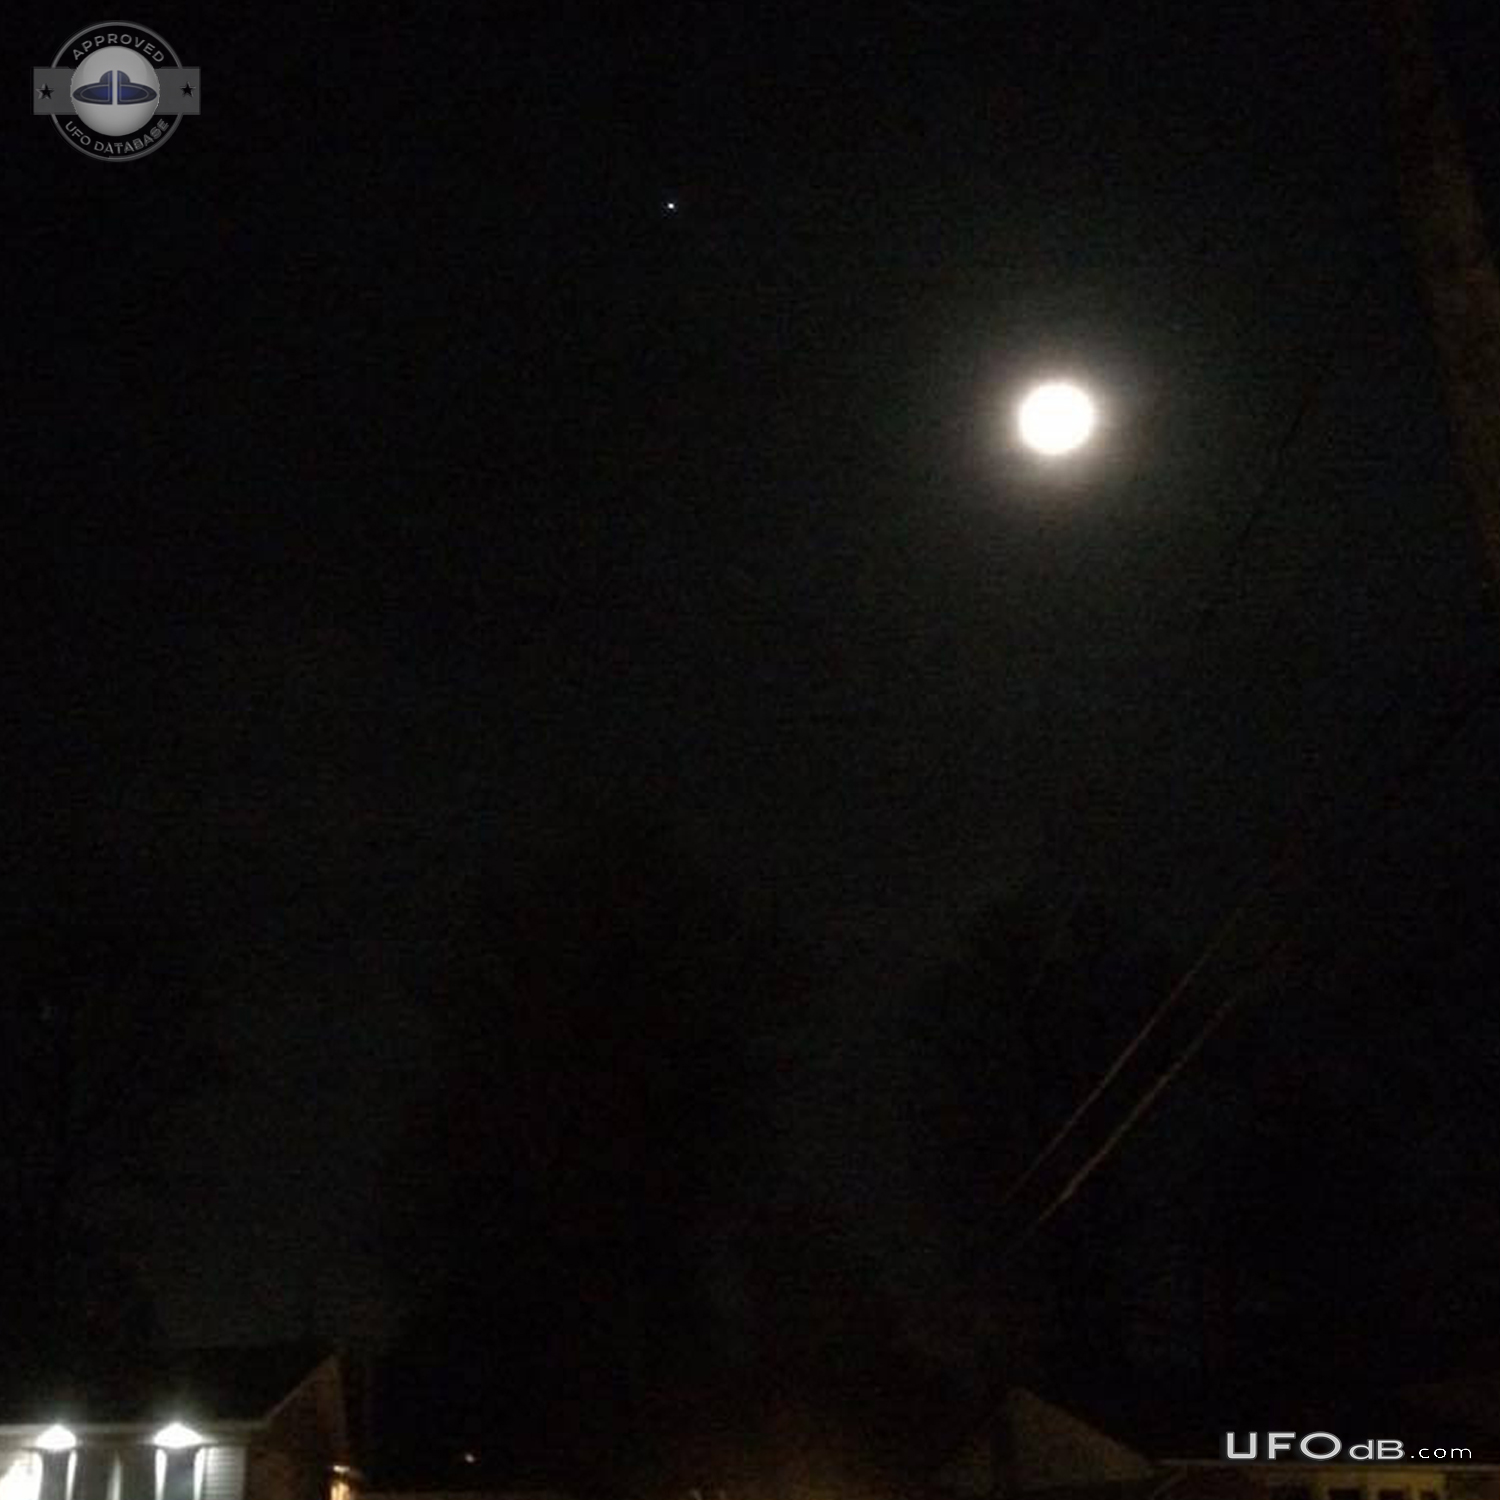 Flashing Star Like UFO seen over Montreal Quebec Canada 2016 UFO Picture #787-2